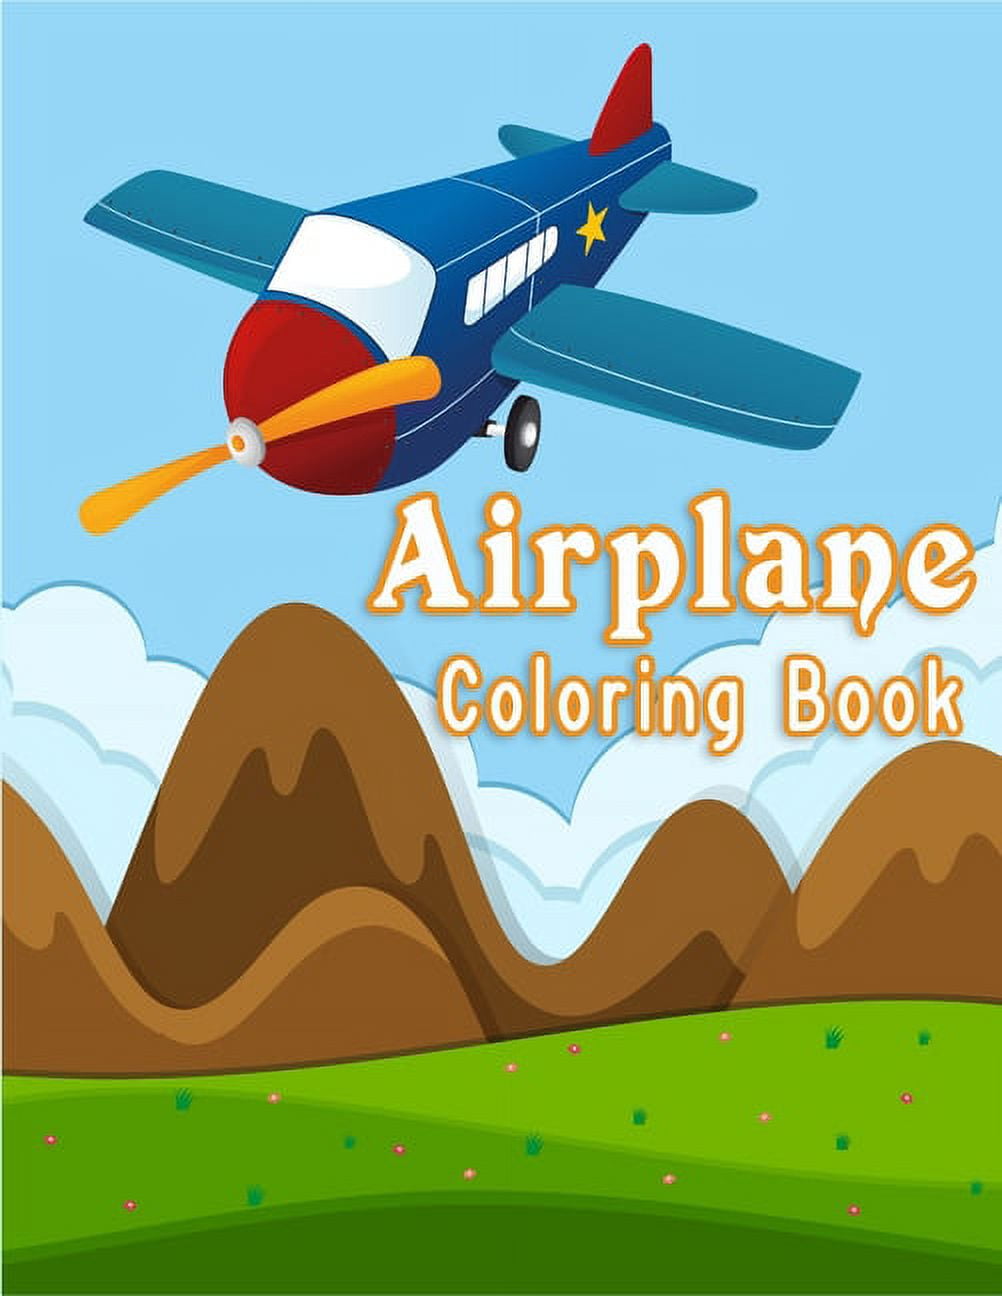 Kids-Travel Activity Storybook-Portable Art Set for Kids- Drawing and  coloring book, Pencil Case, Road Trip-Airplane-Activities for Kids Ages 4-8